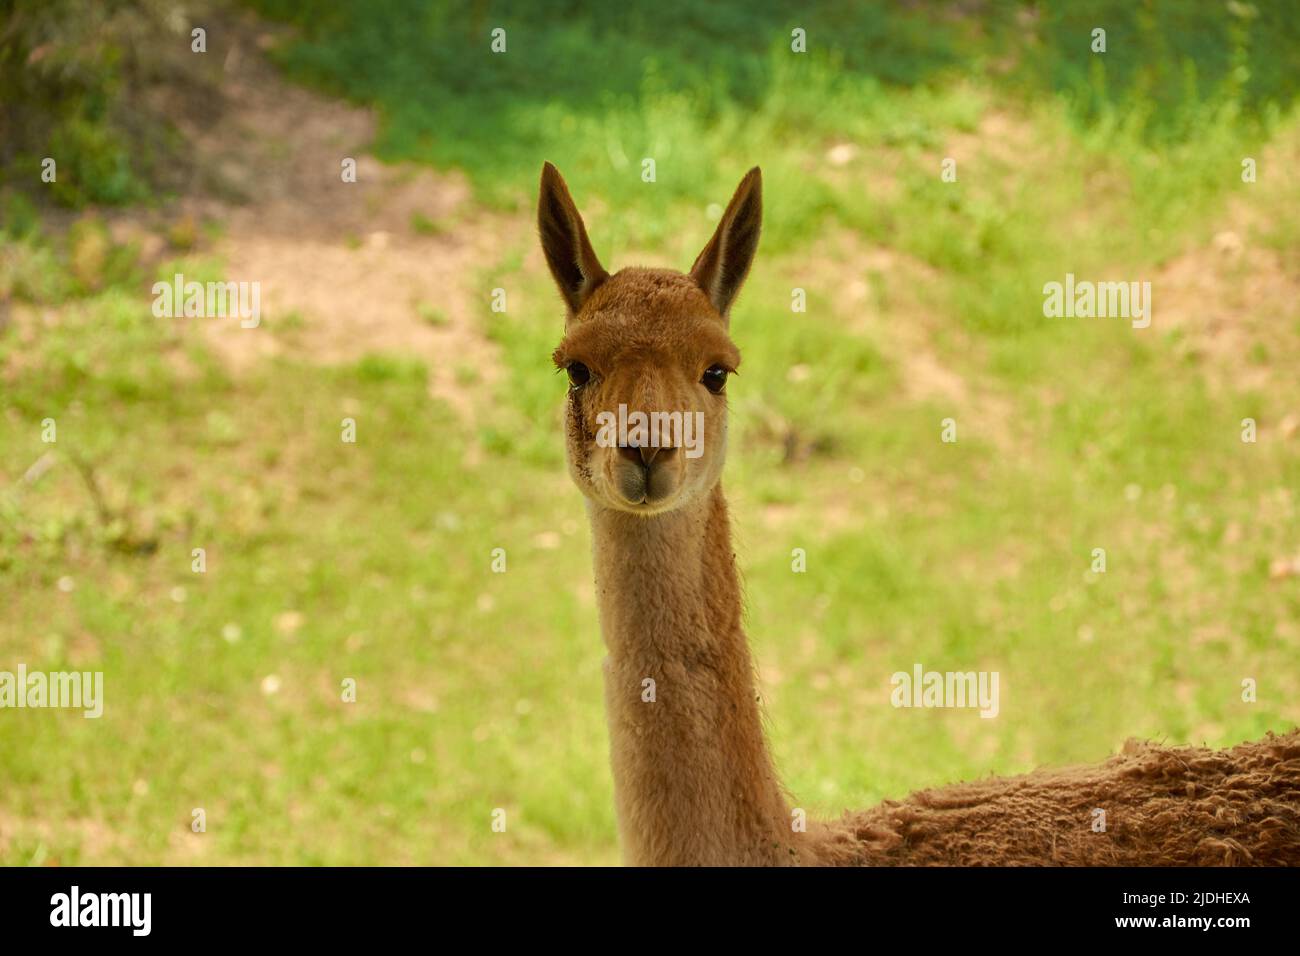 Lama vicugna is grazing in a pasture. Portrait of a female vicuna. A species of artiodactyl mammals of the camel family Stock Photo